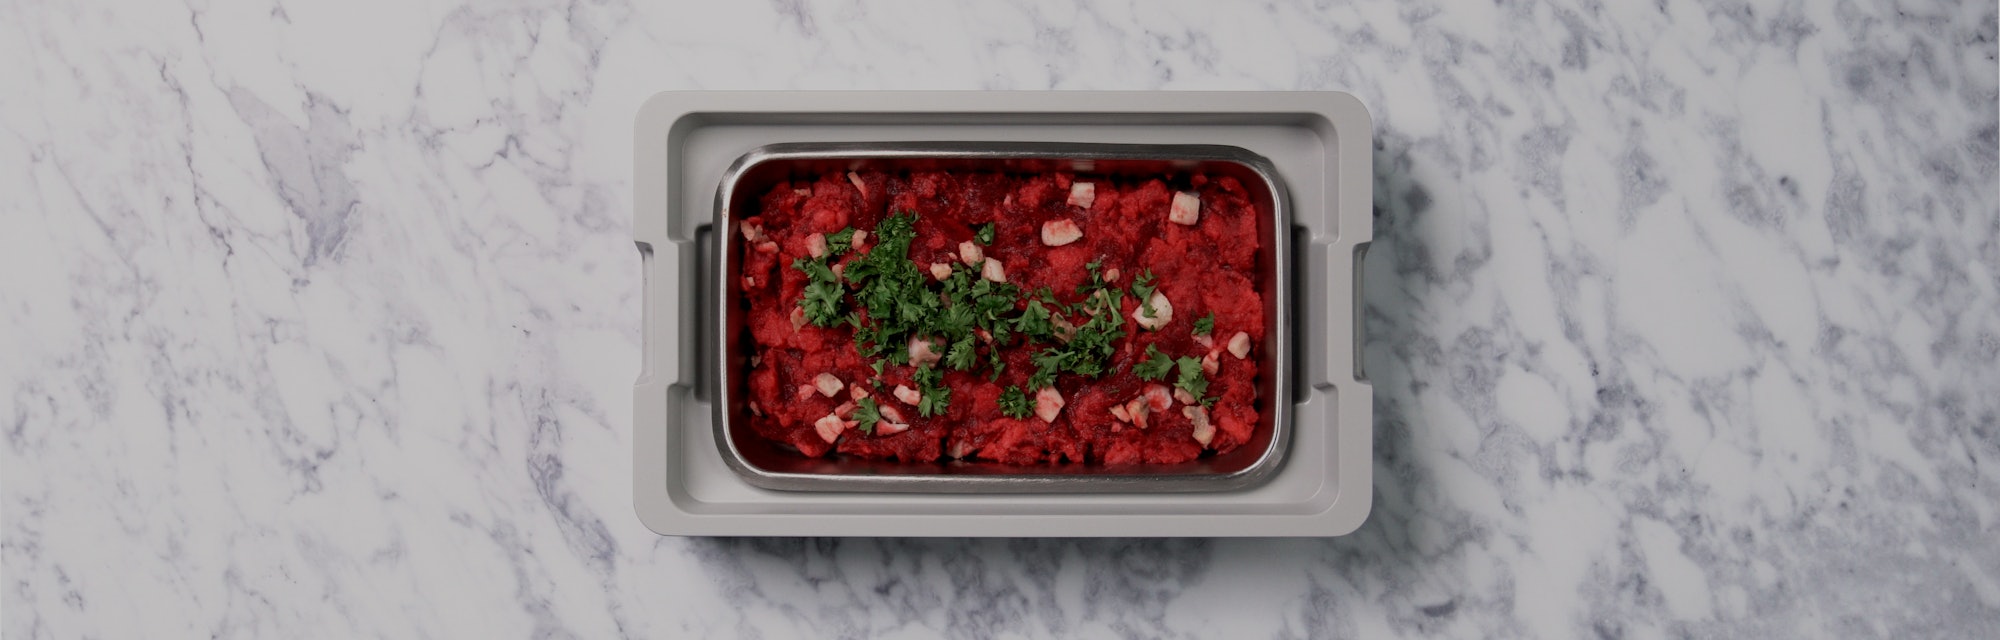 An aerial view of an open lunchbox on a marble countertop. A red, delicious looking slop is inside t...